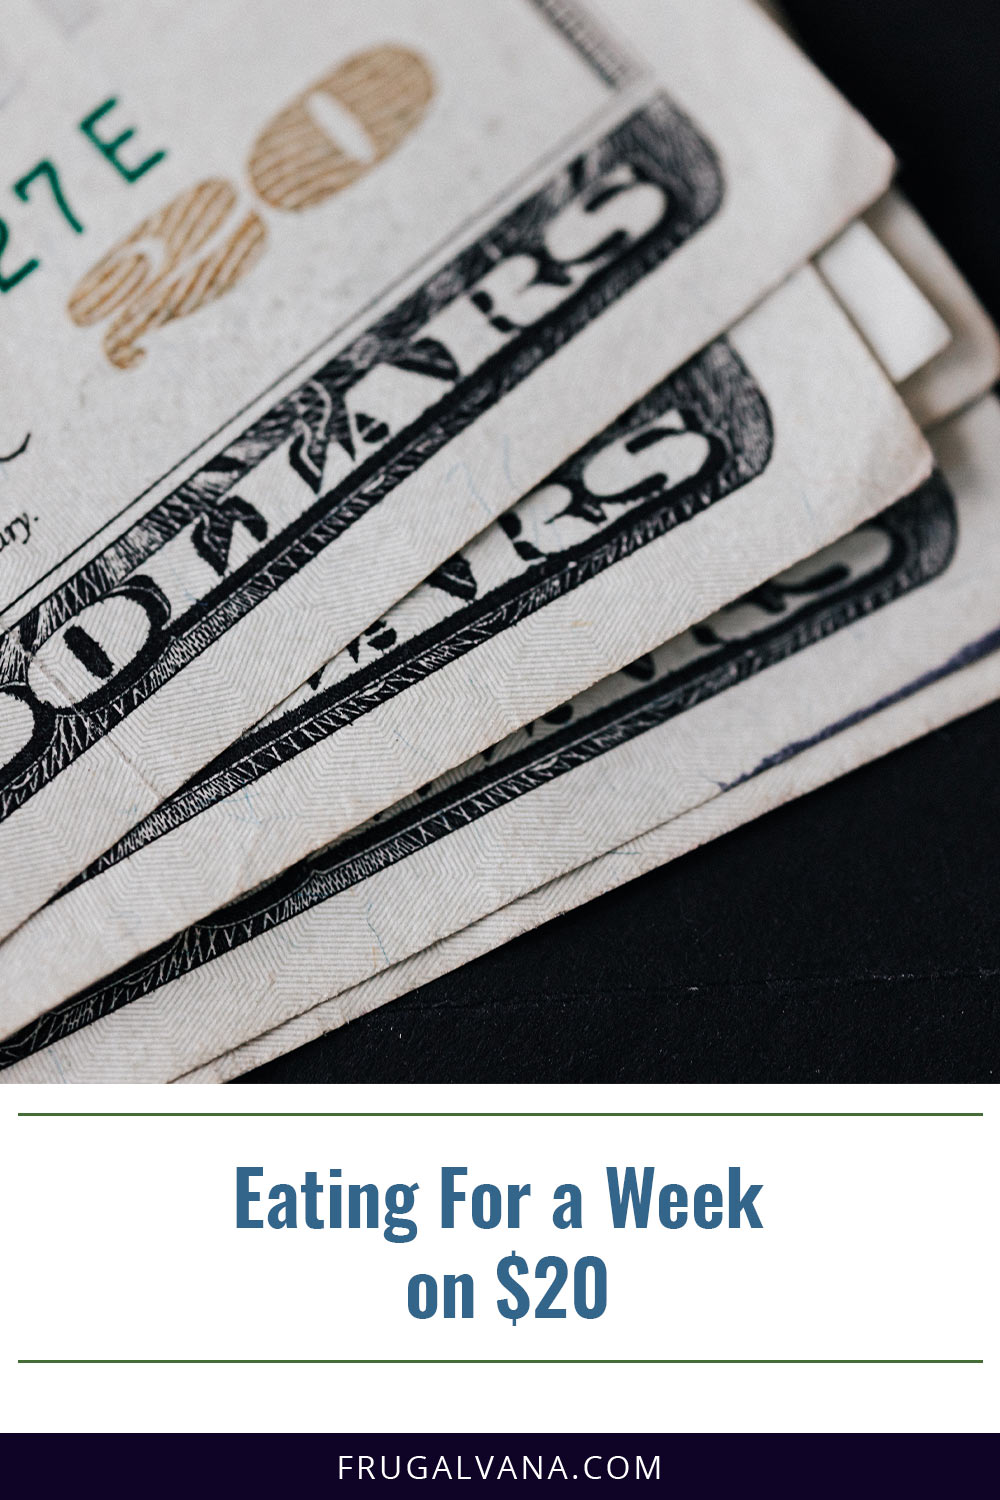 Eating For a Week on $20